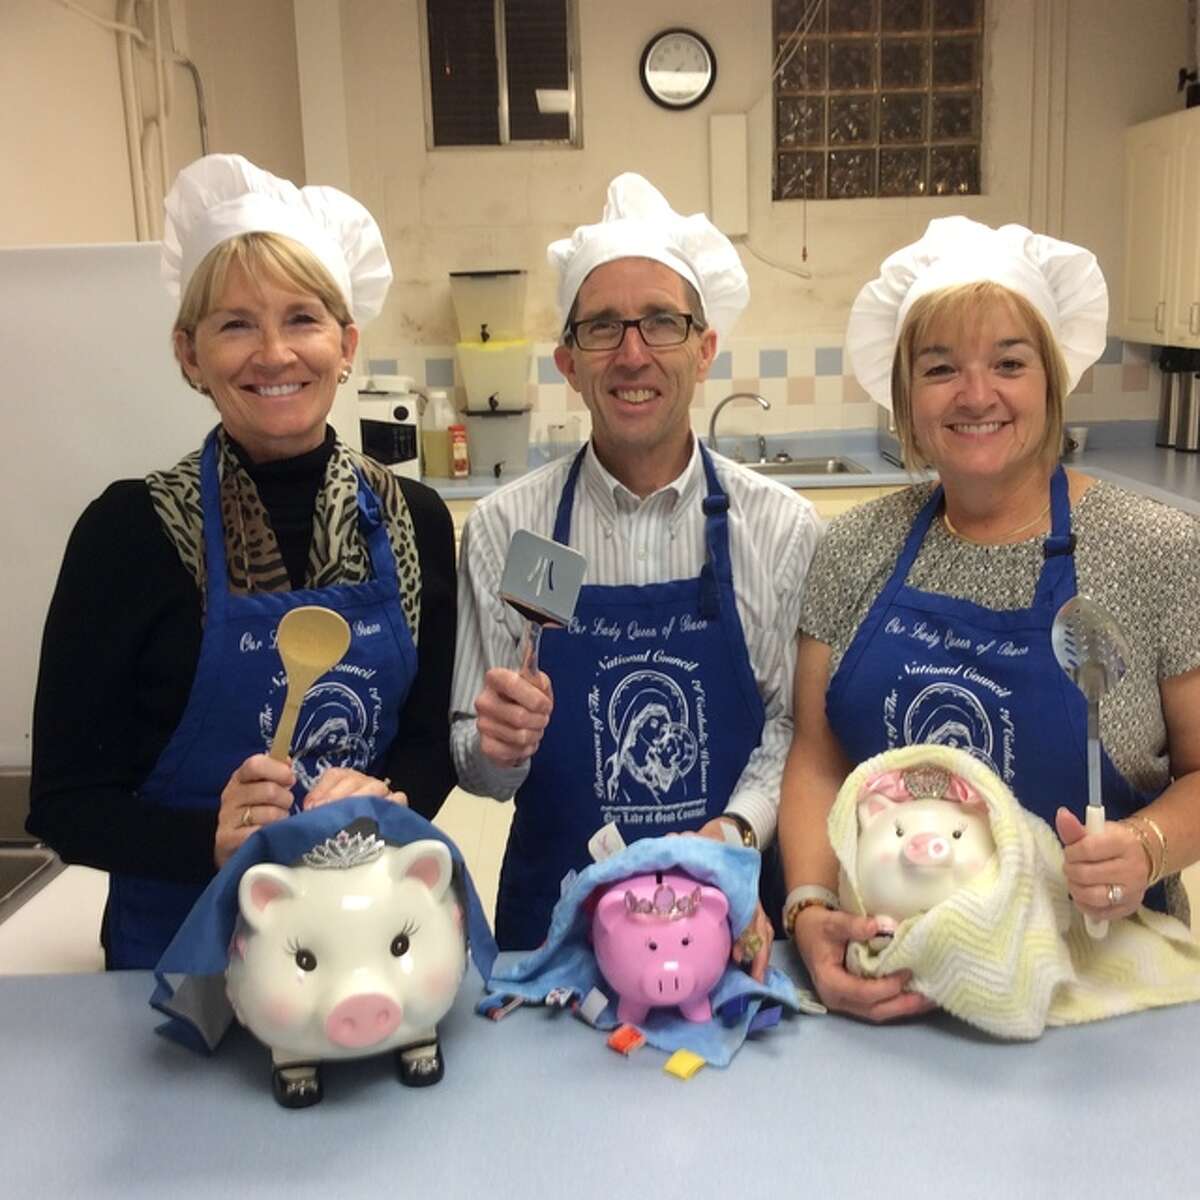 Getting ready for the Smorgasbord Dinner and Craft Bazaar on Sunday, Dec. 4 at Our Lady Queen of Peace are committee chairmen, from left, Becky Sulsberger, Dennis Gvillo and Stephanie Gvillo.